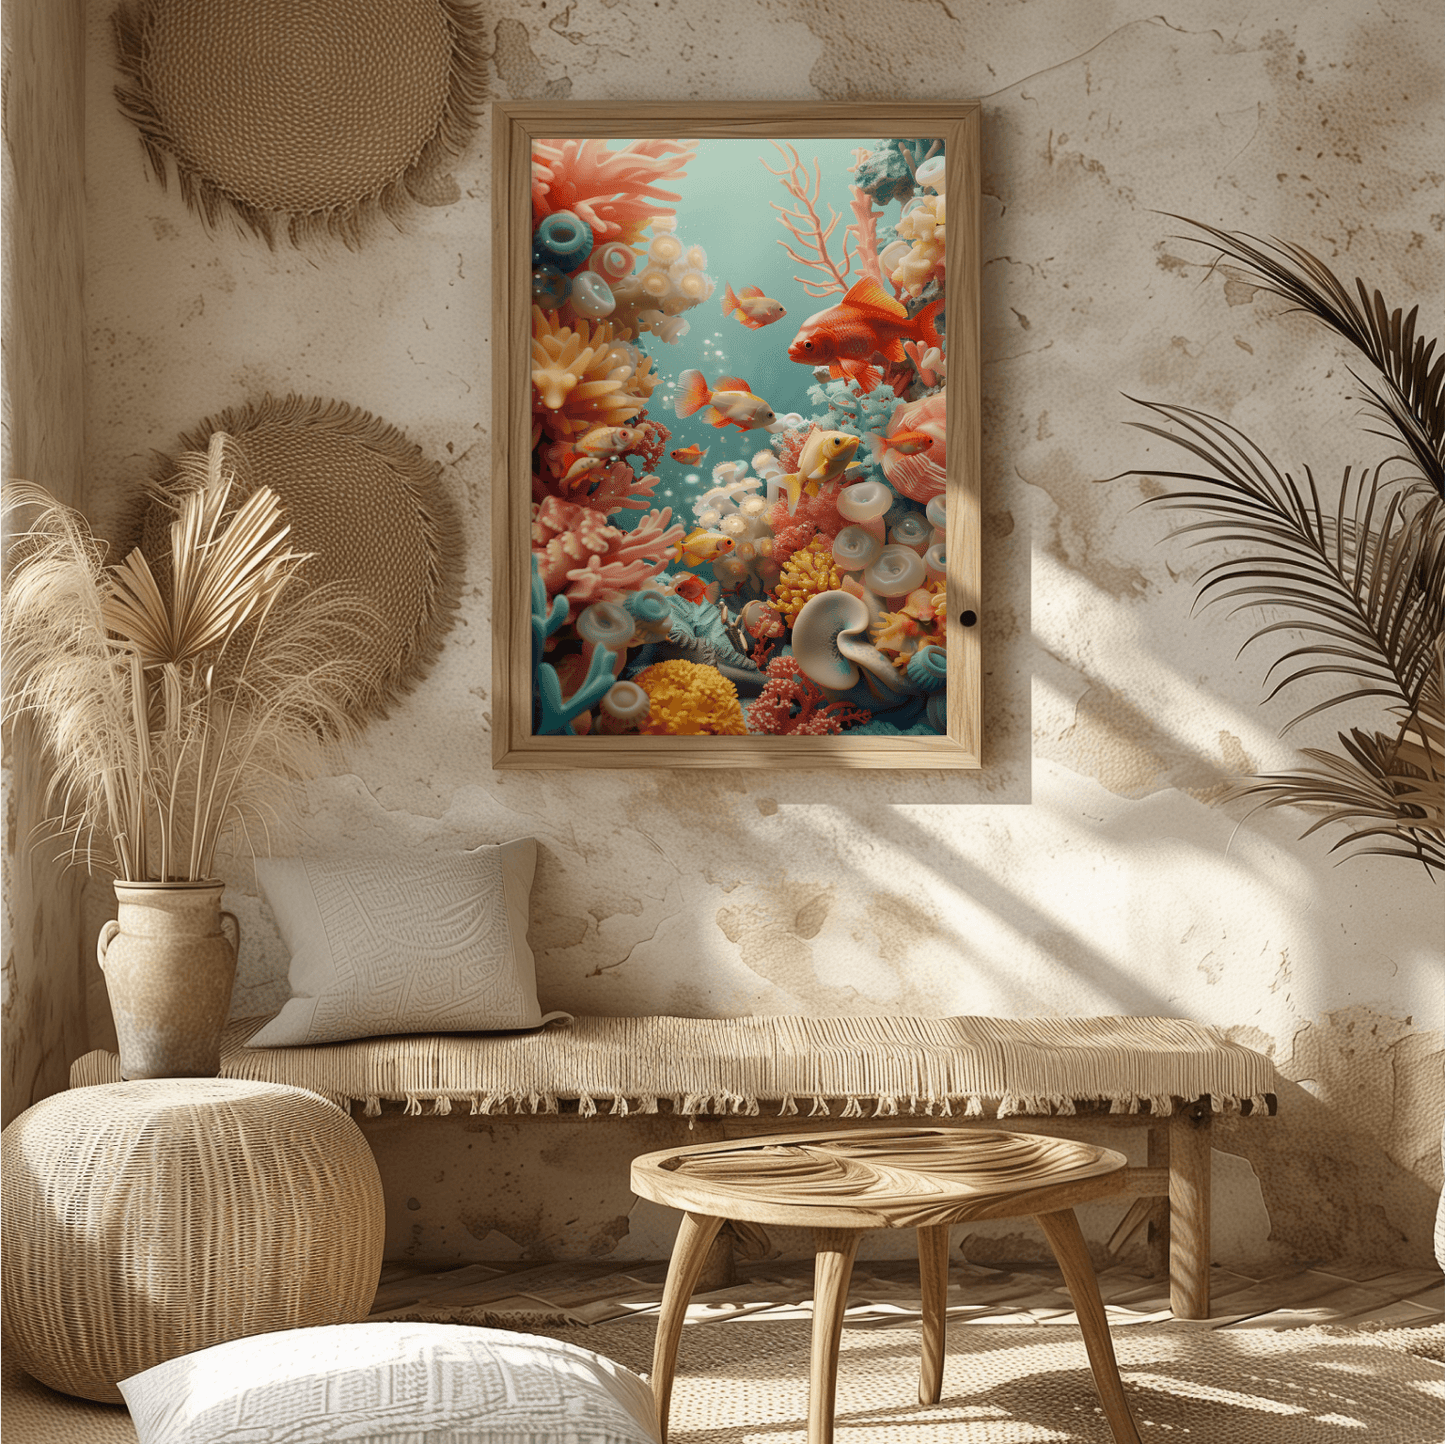 A framed art print of a coral reef with fish swimming